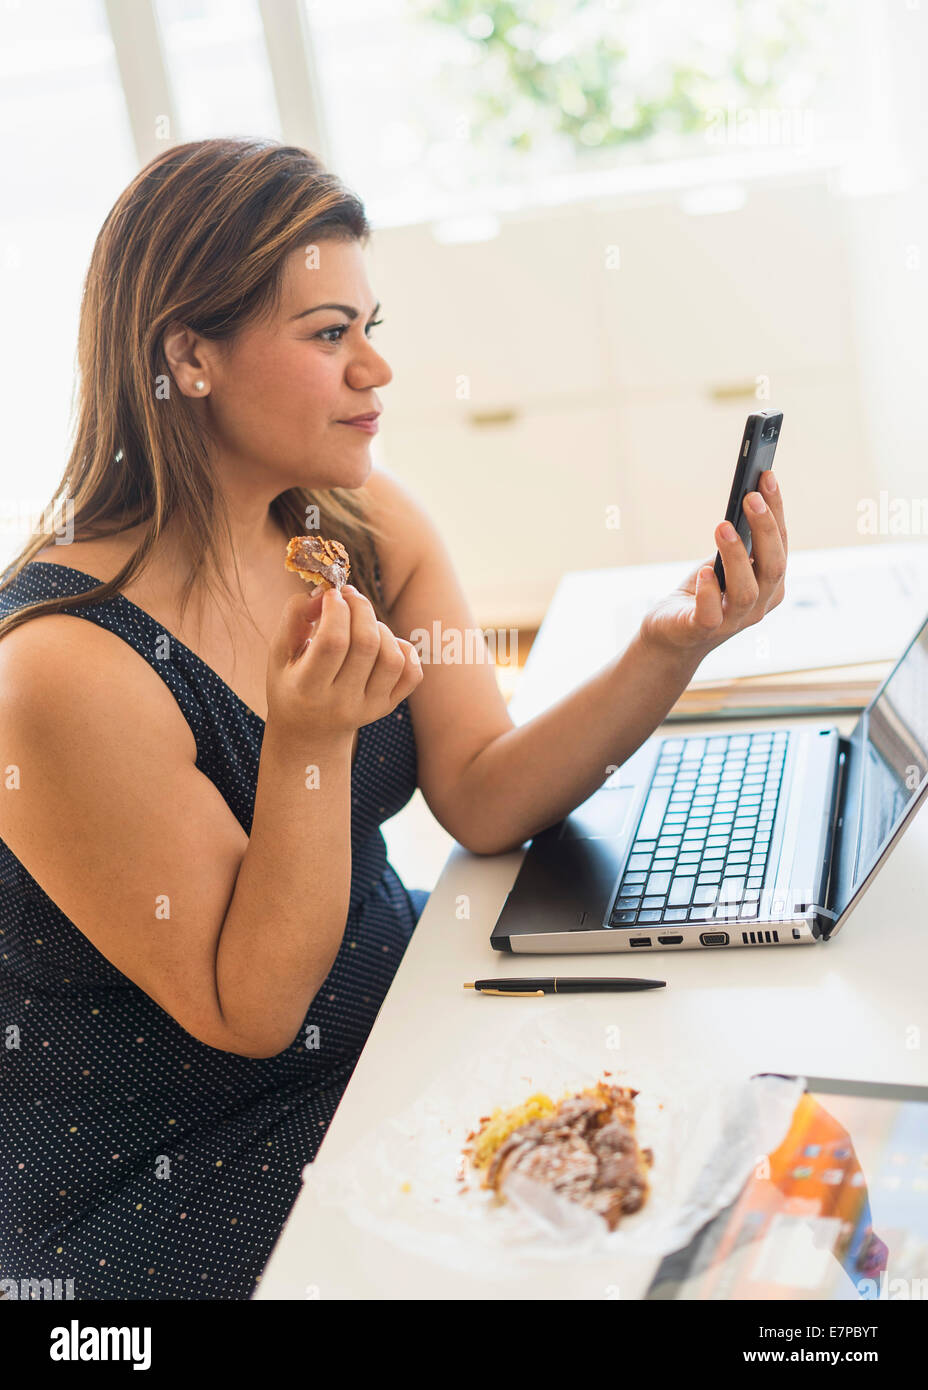 Woman eating croissant and using mobile phone in office Stock Photo